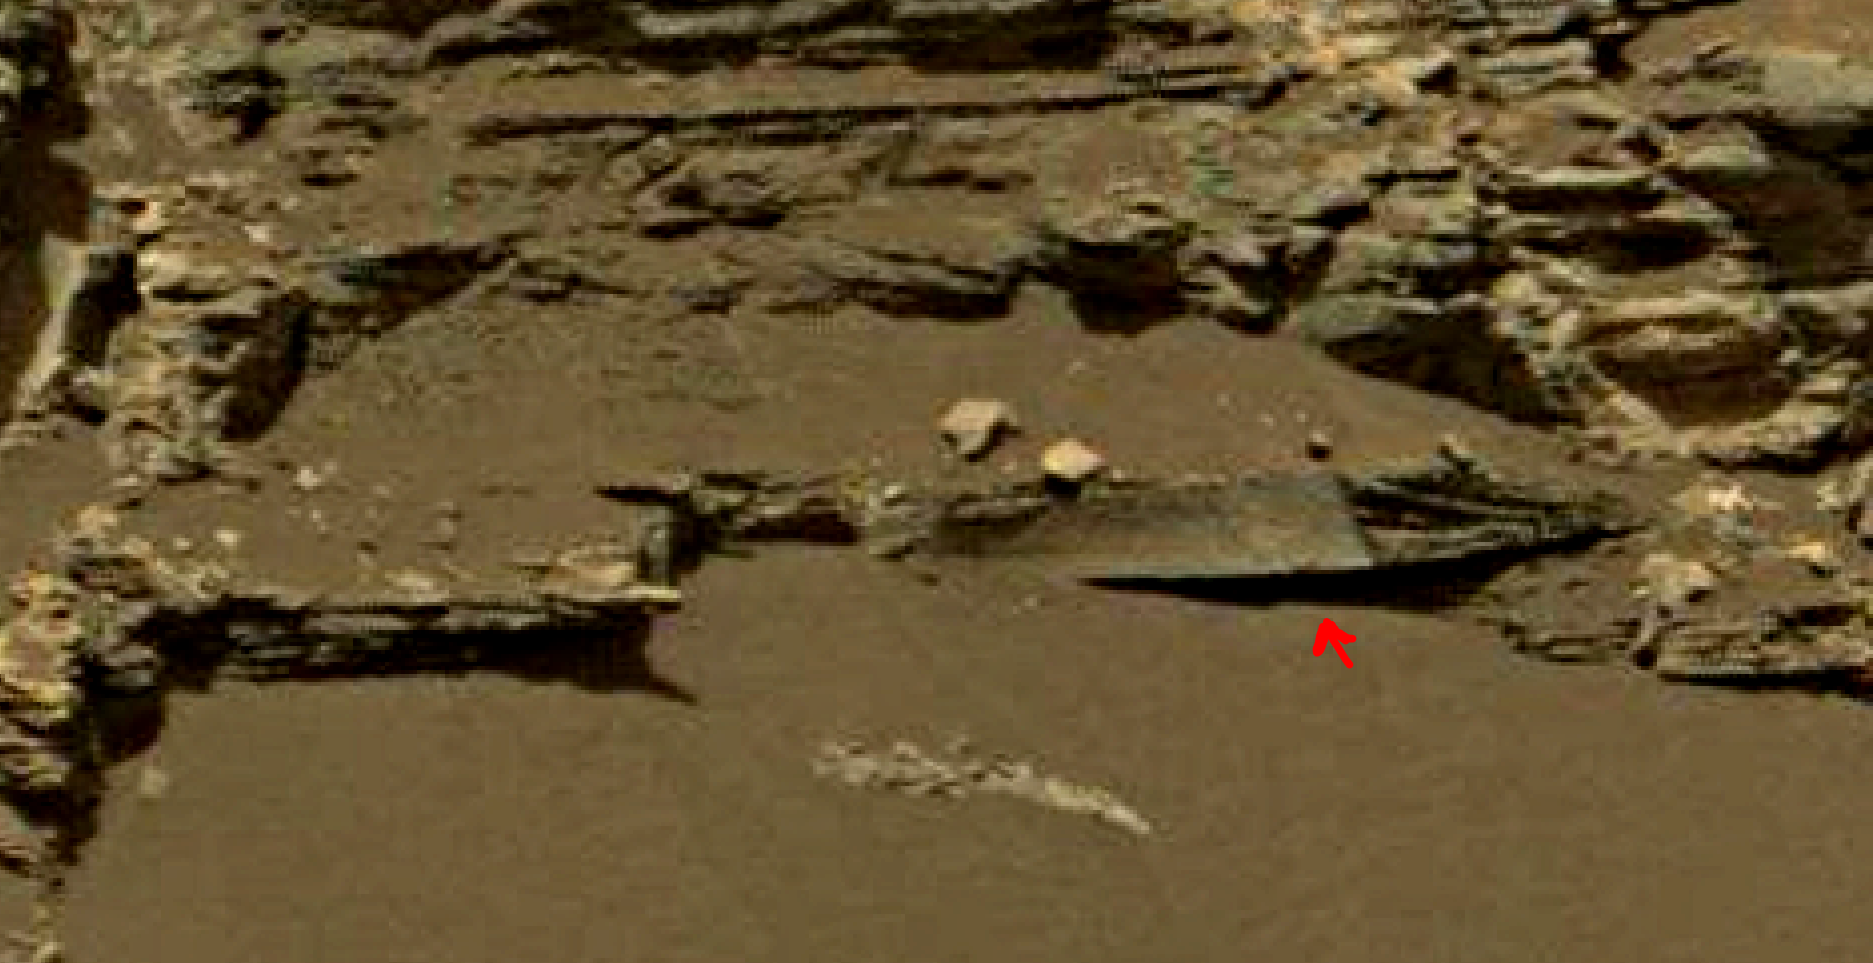 mars-sol-1454-anomaly-artifacts-8-was-life-on-mars